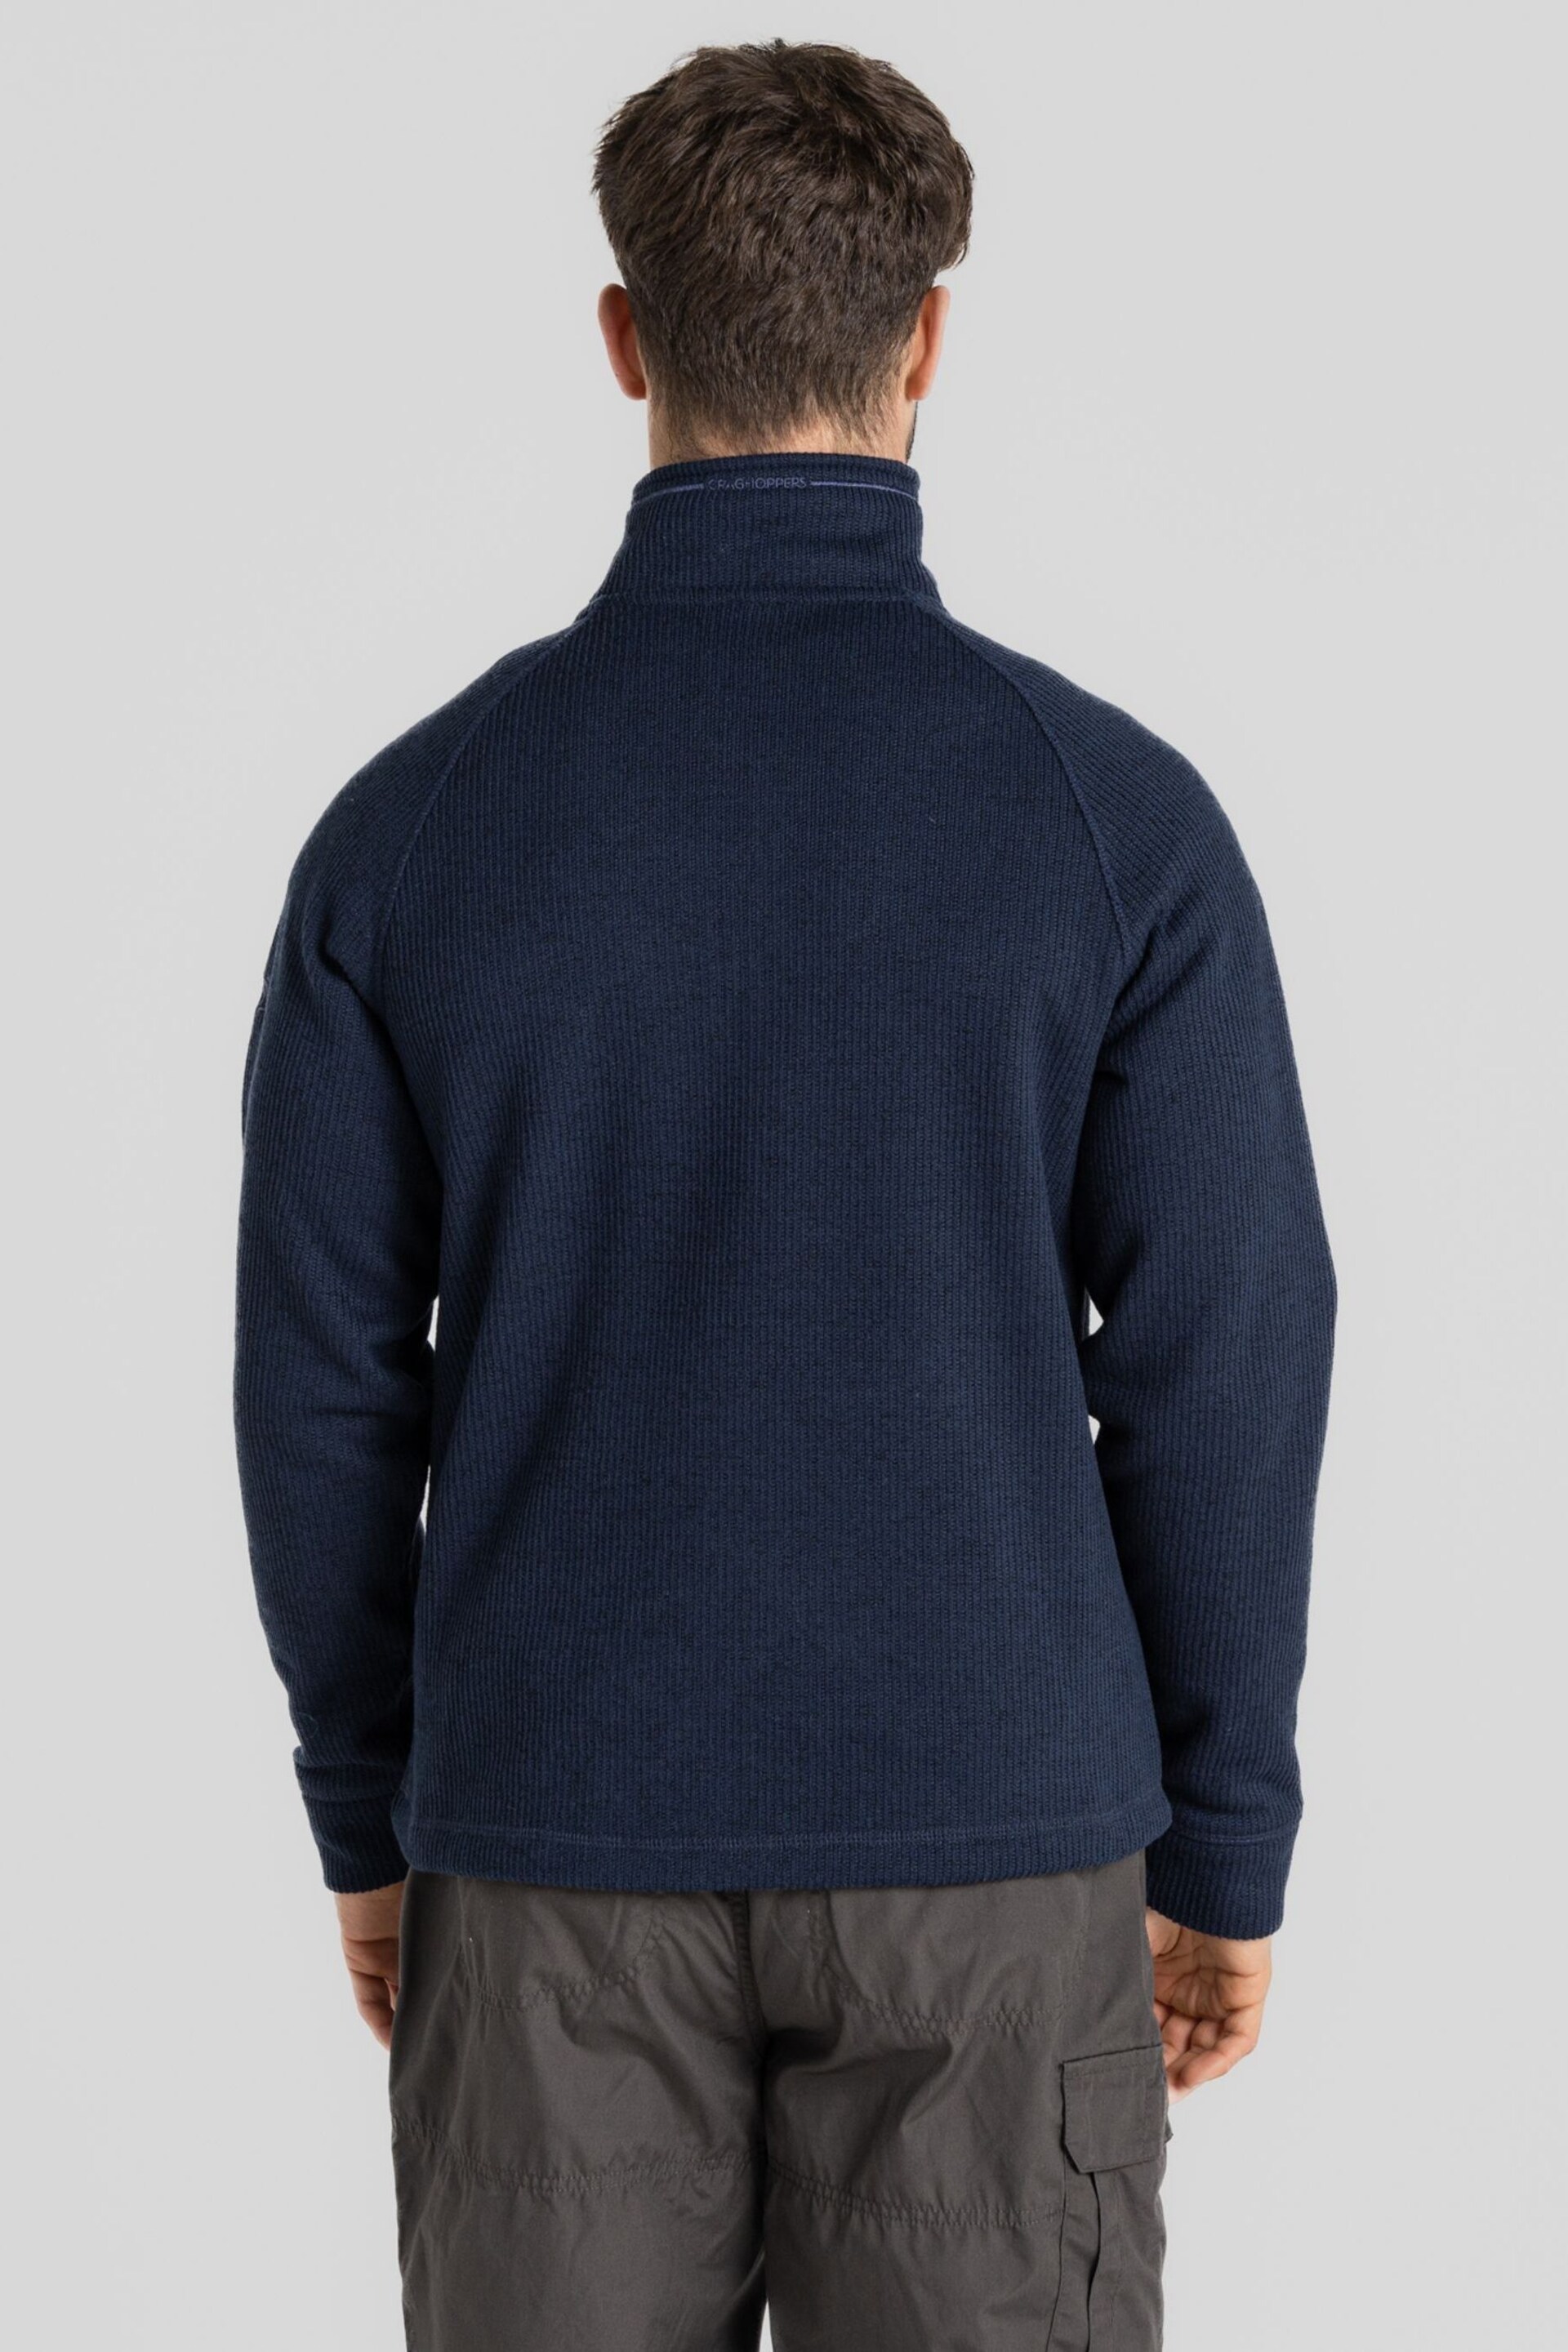 Craghoppers Blue Wole Half Zip Top - Image 3 of 7